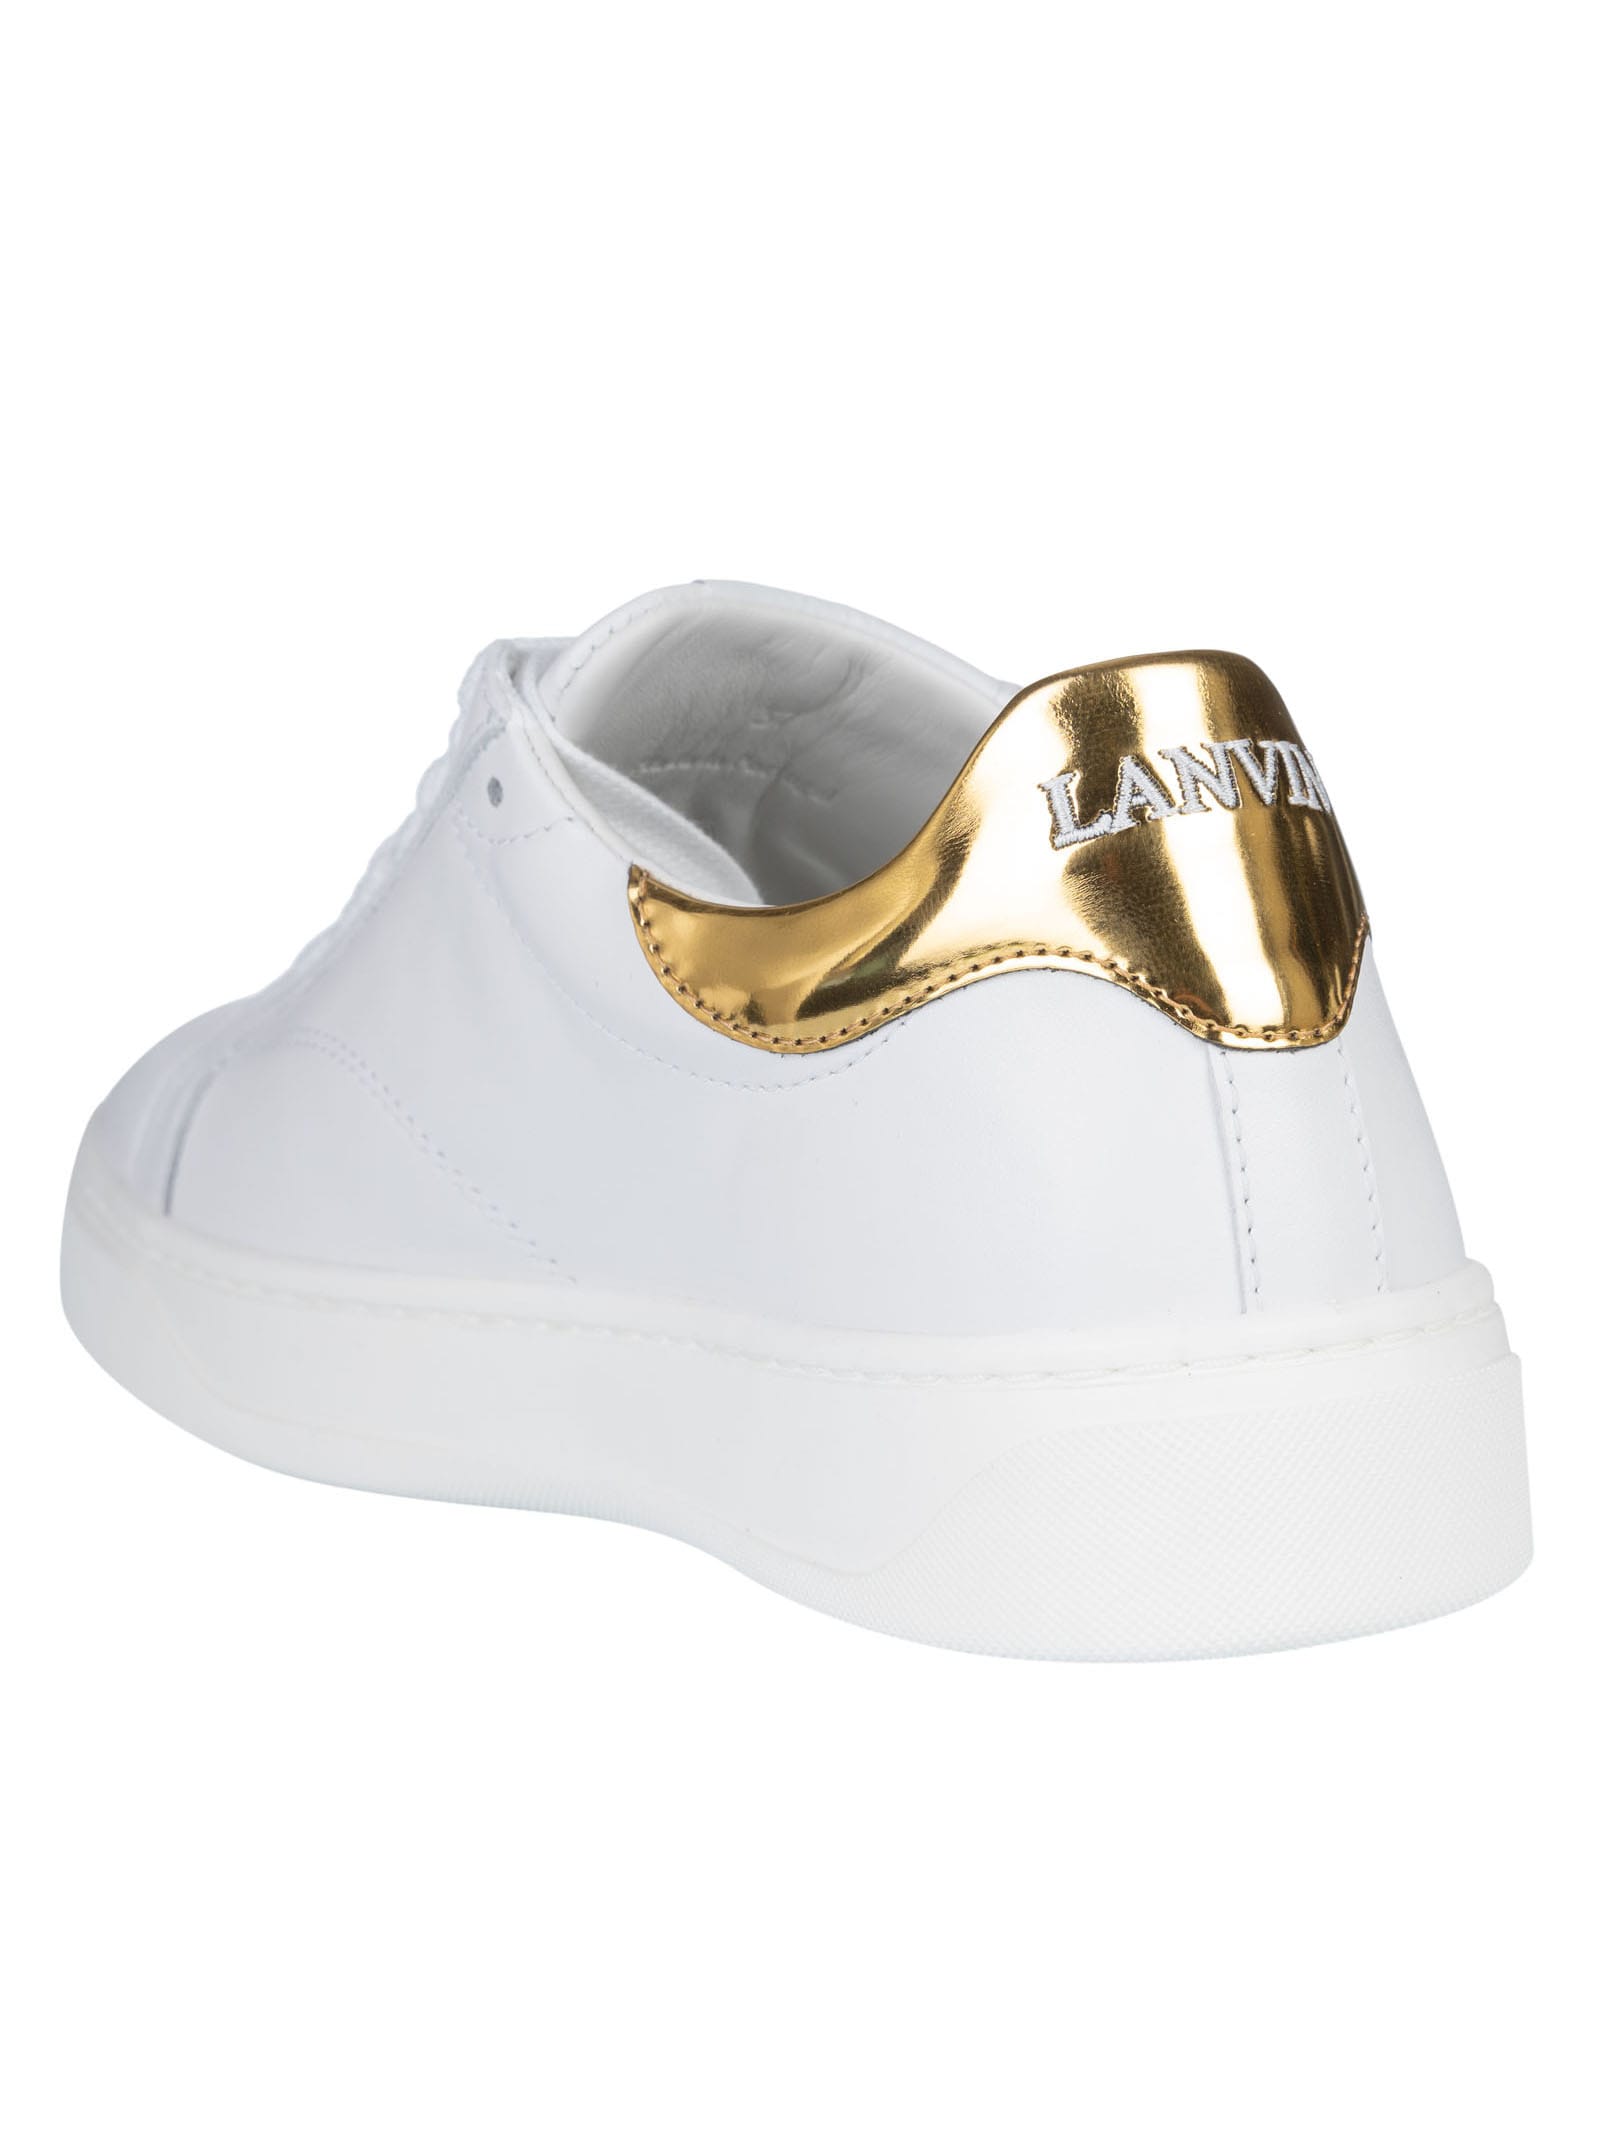 Shop Lanvin Ddb0 Sneakers In White/gold